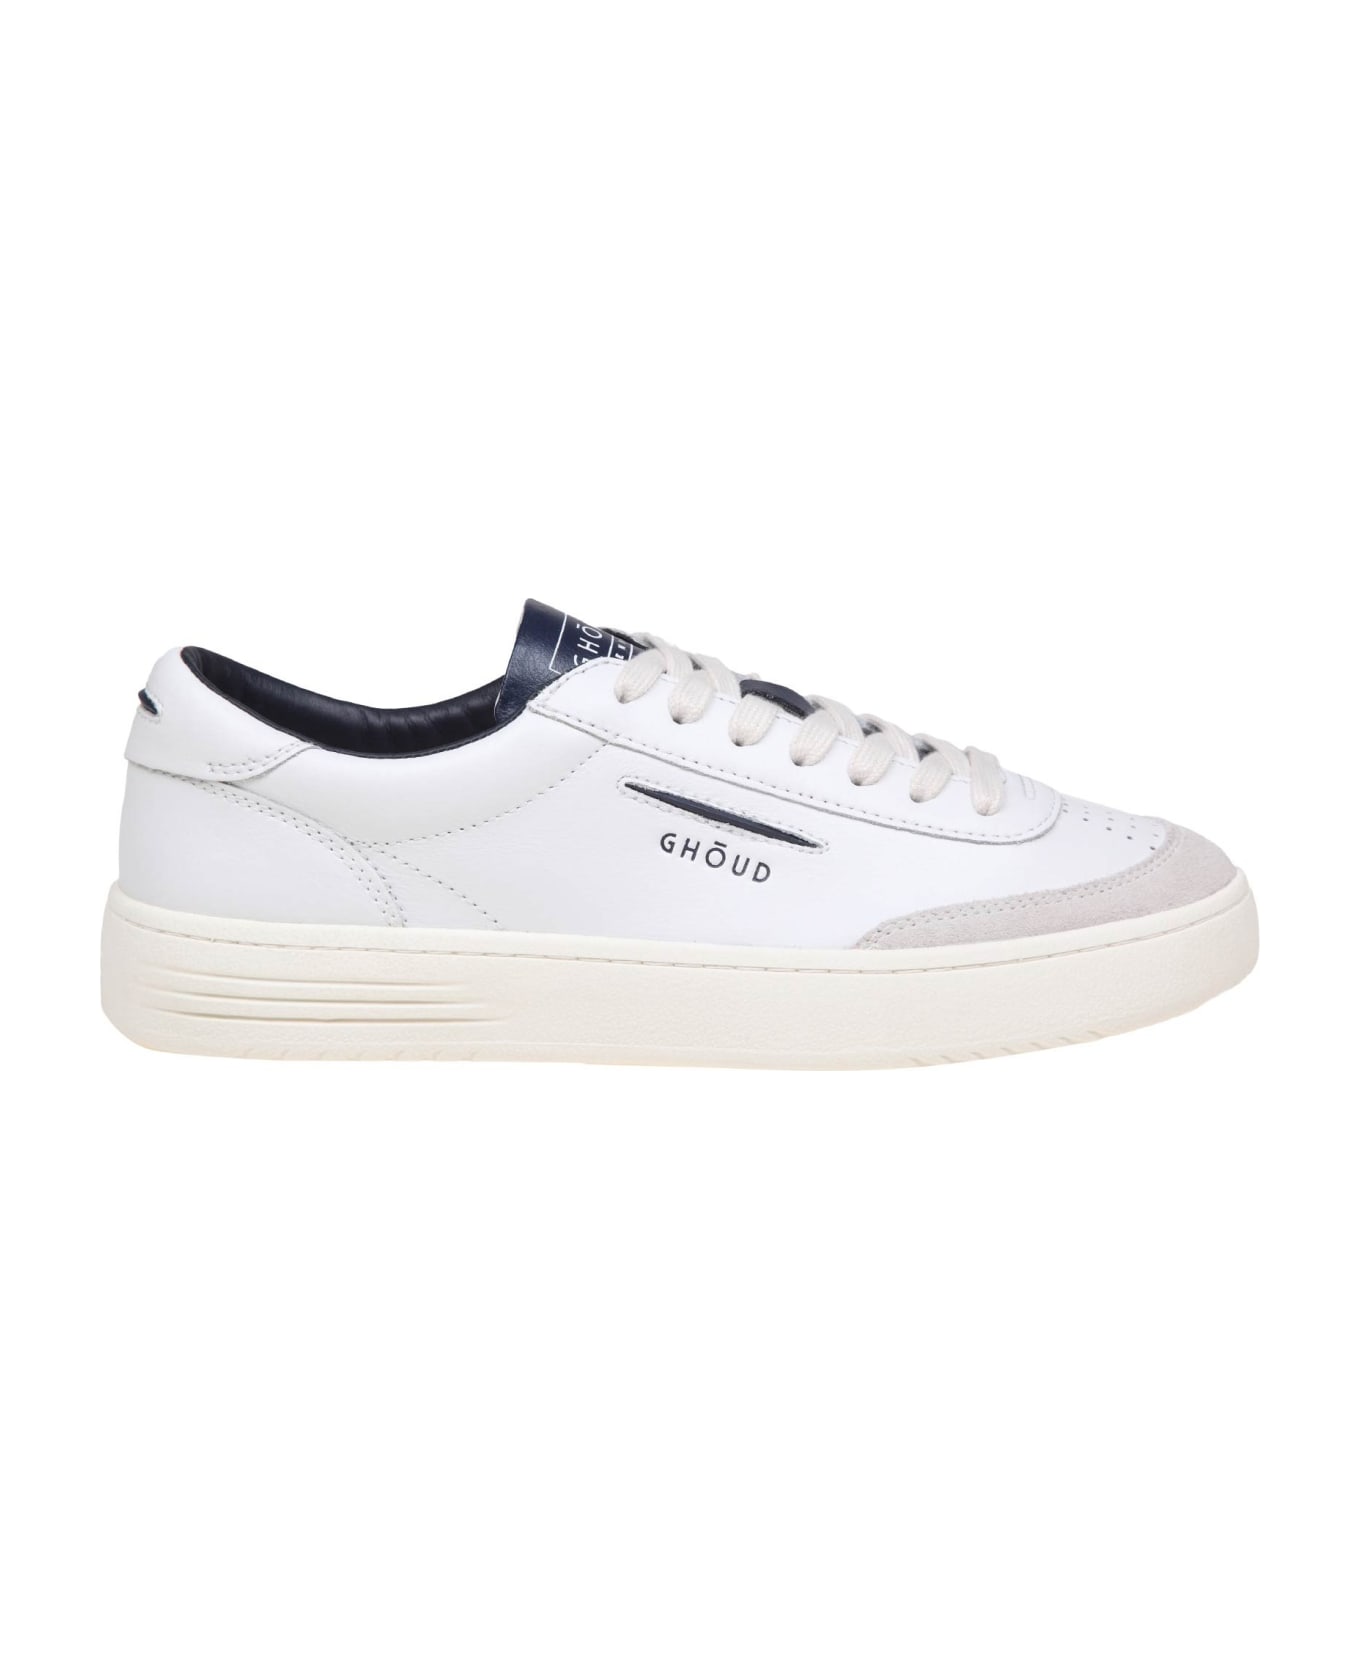 GHOUD Lido Low Sneakers In White/blue Leather And Suede - Blue